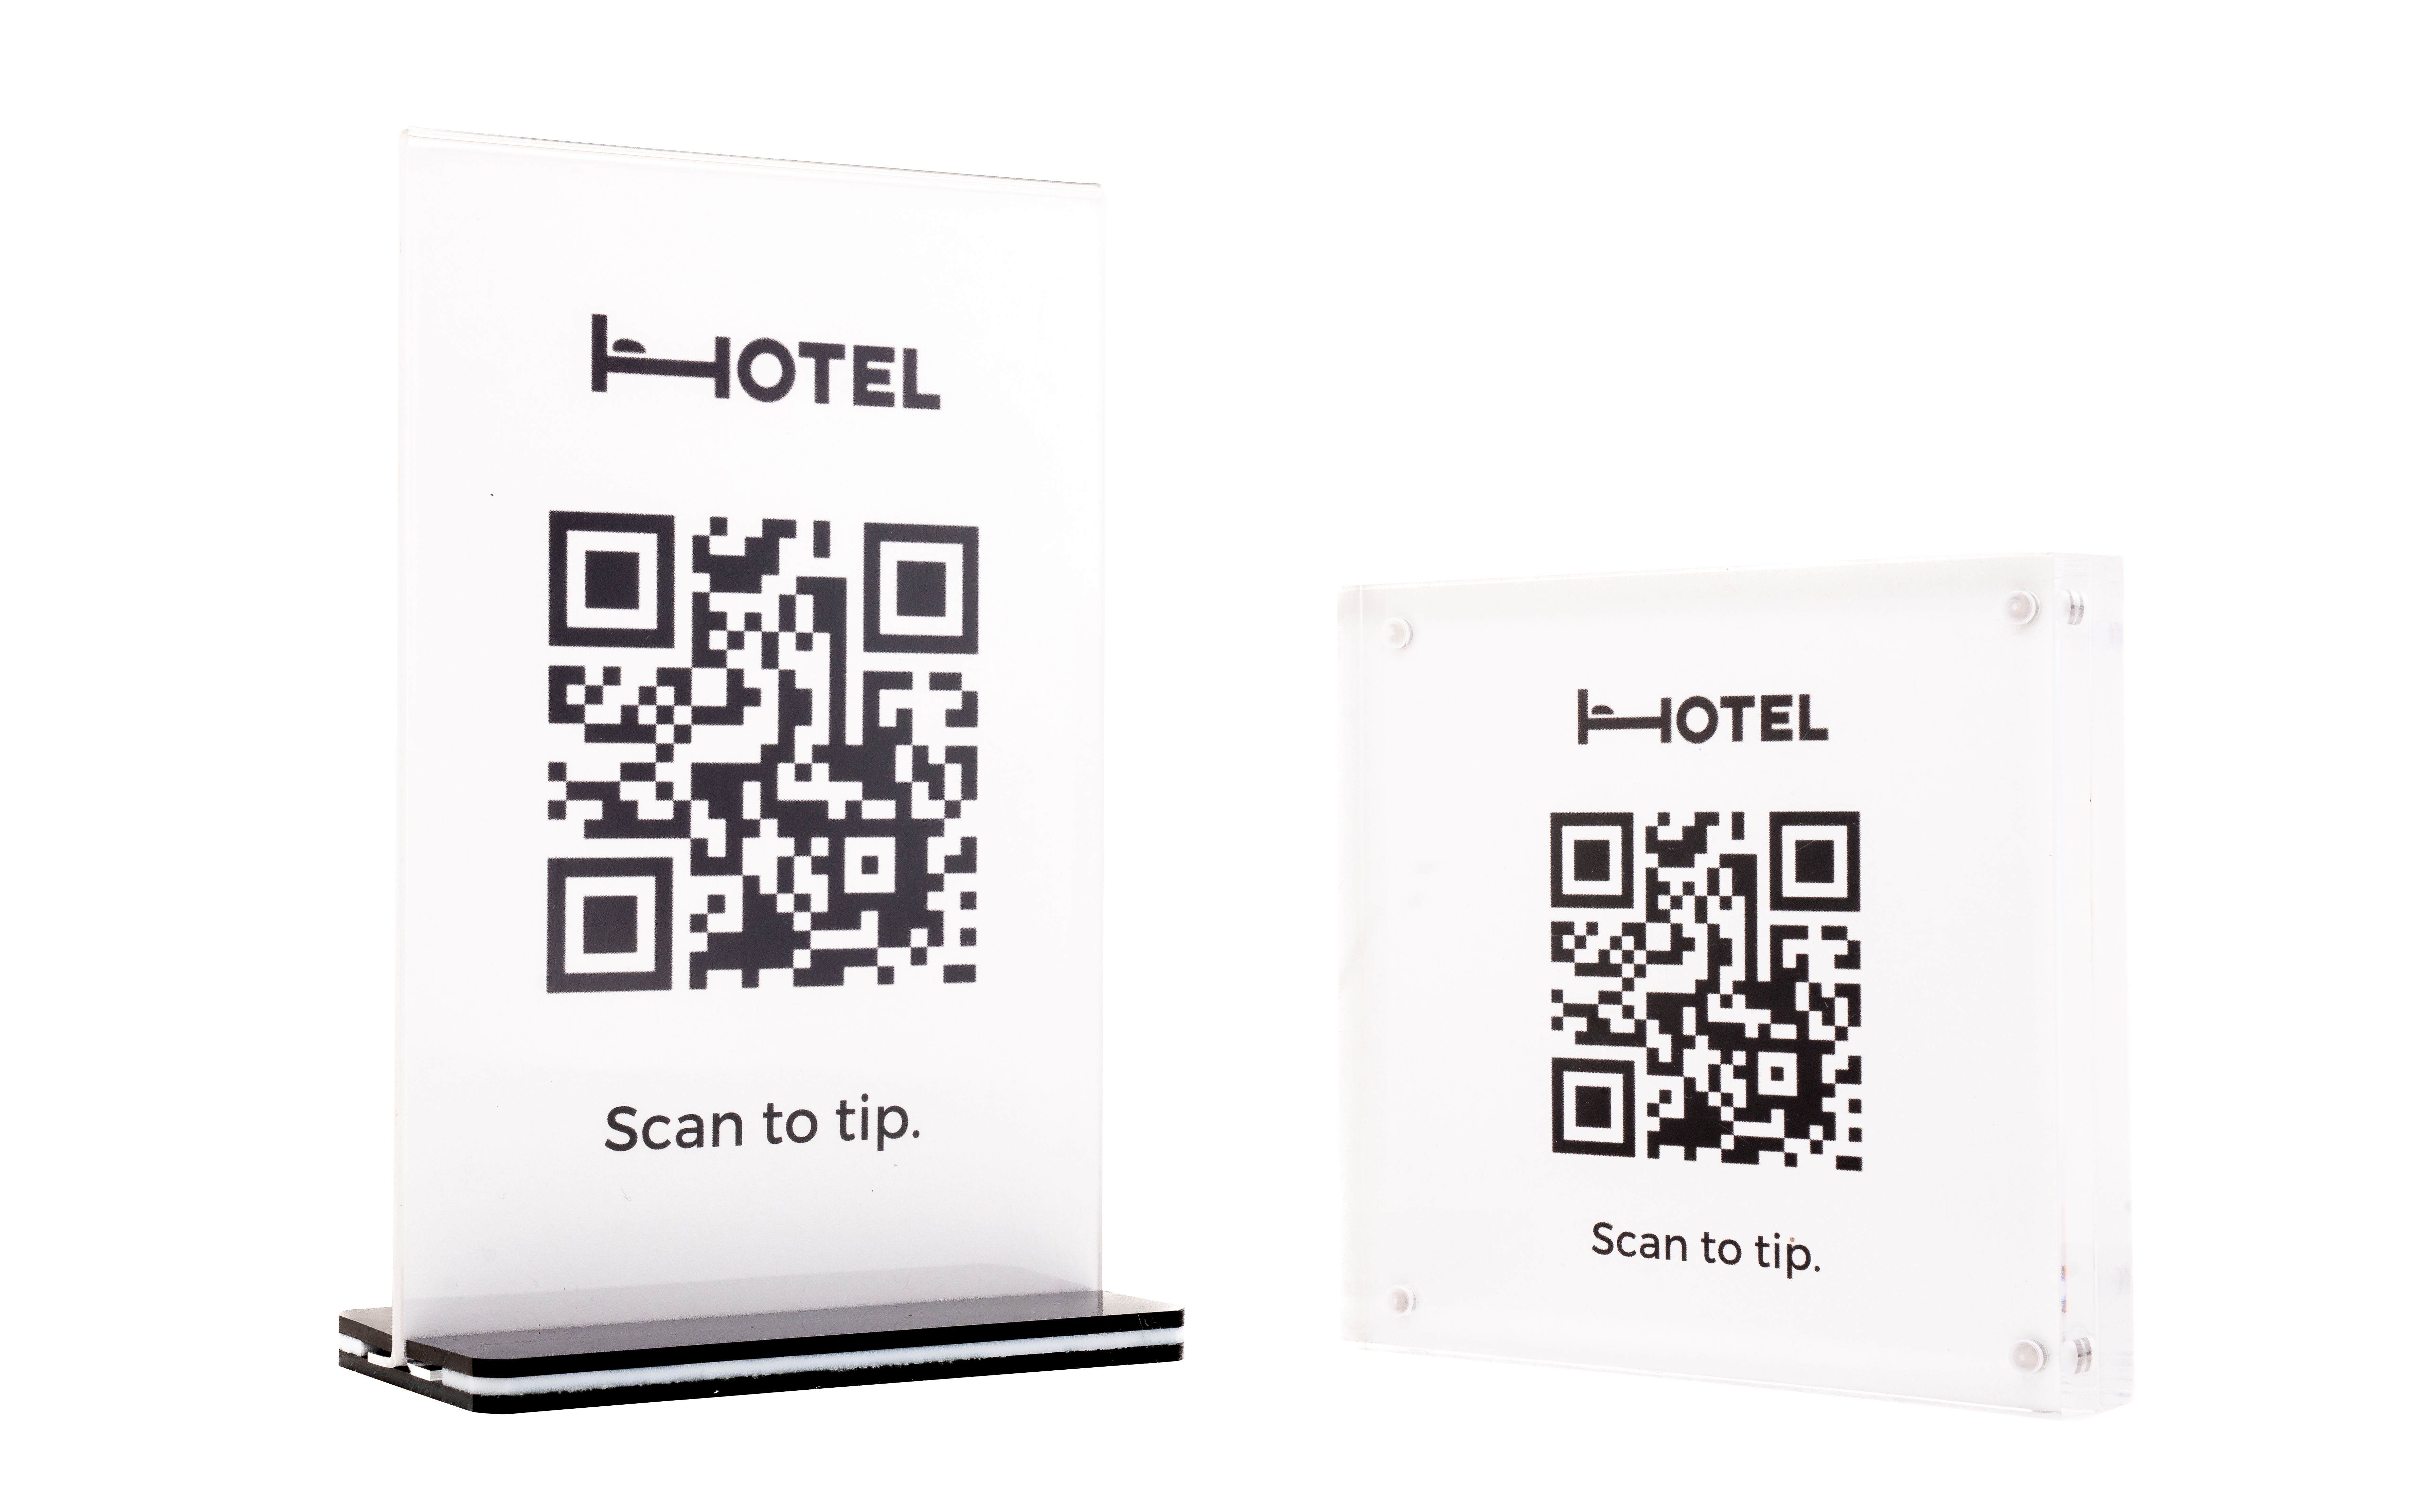 QR code for hotel or salon guests to tip.